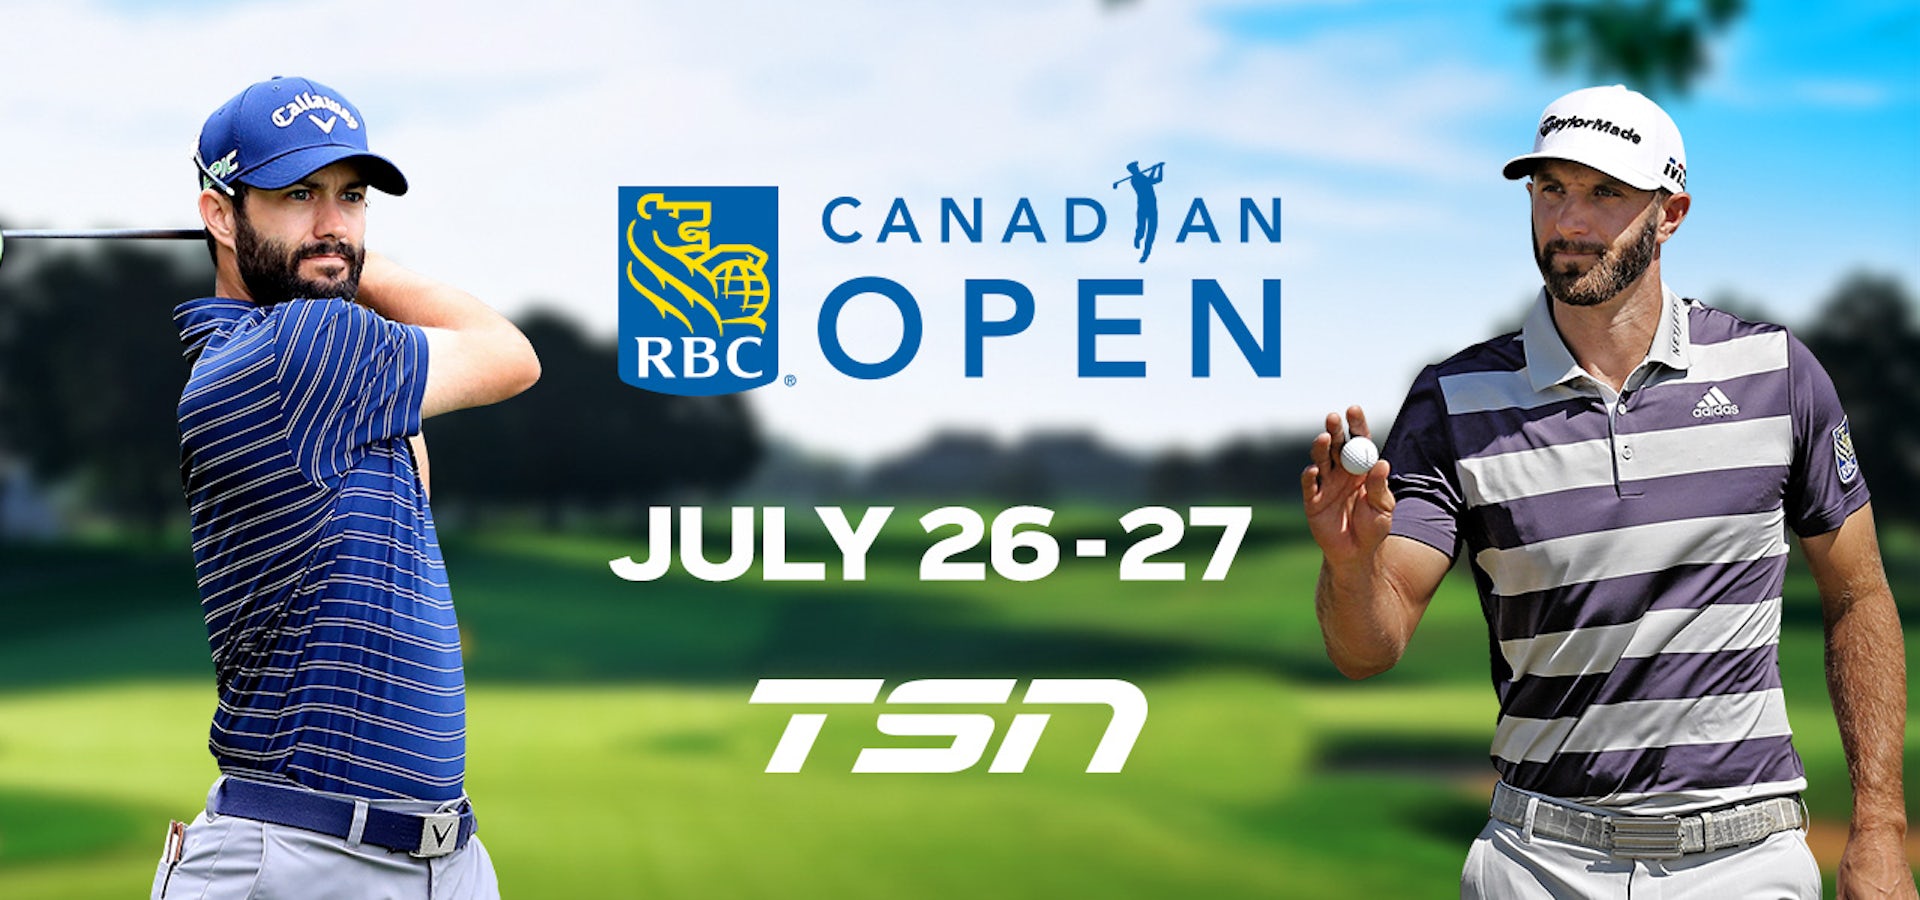 TSN Delivers Early Round Coverage of the RBC CANADIAN OPEN, Beginning